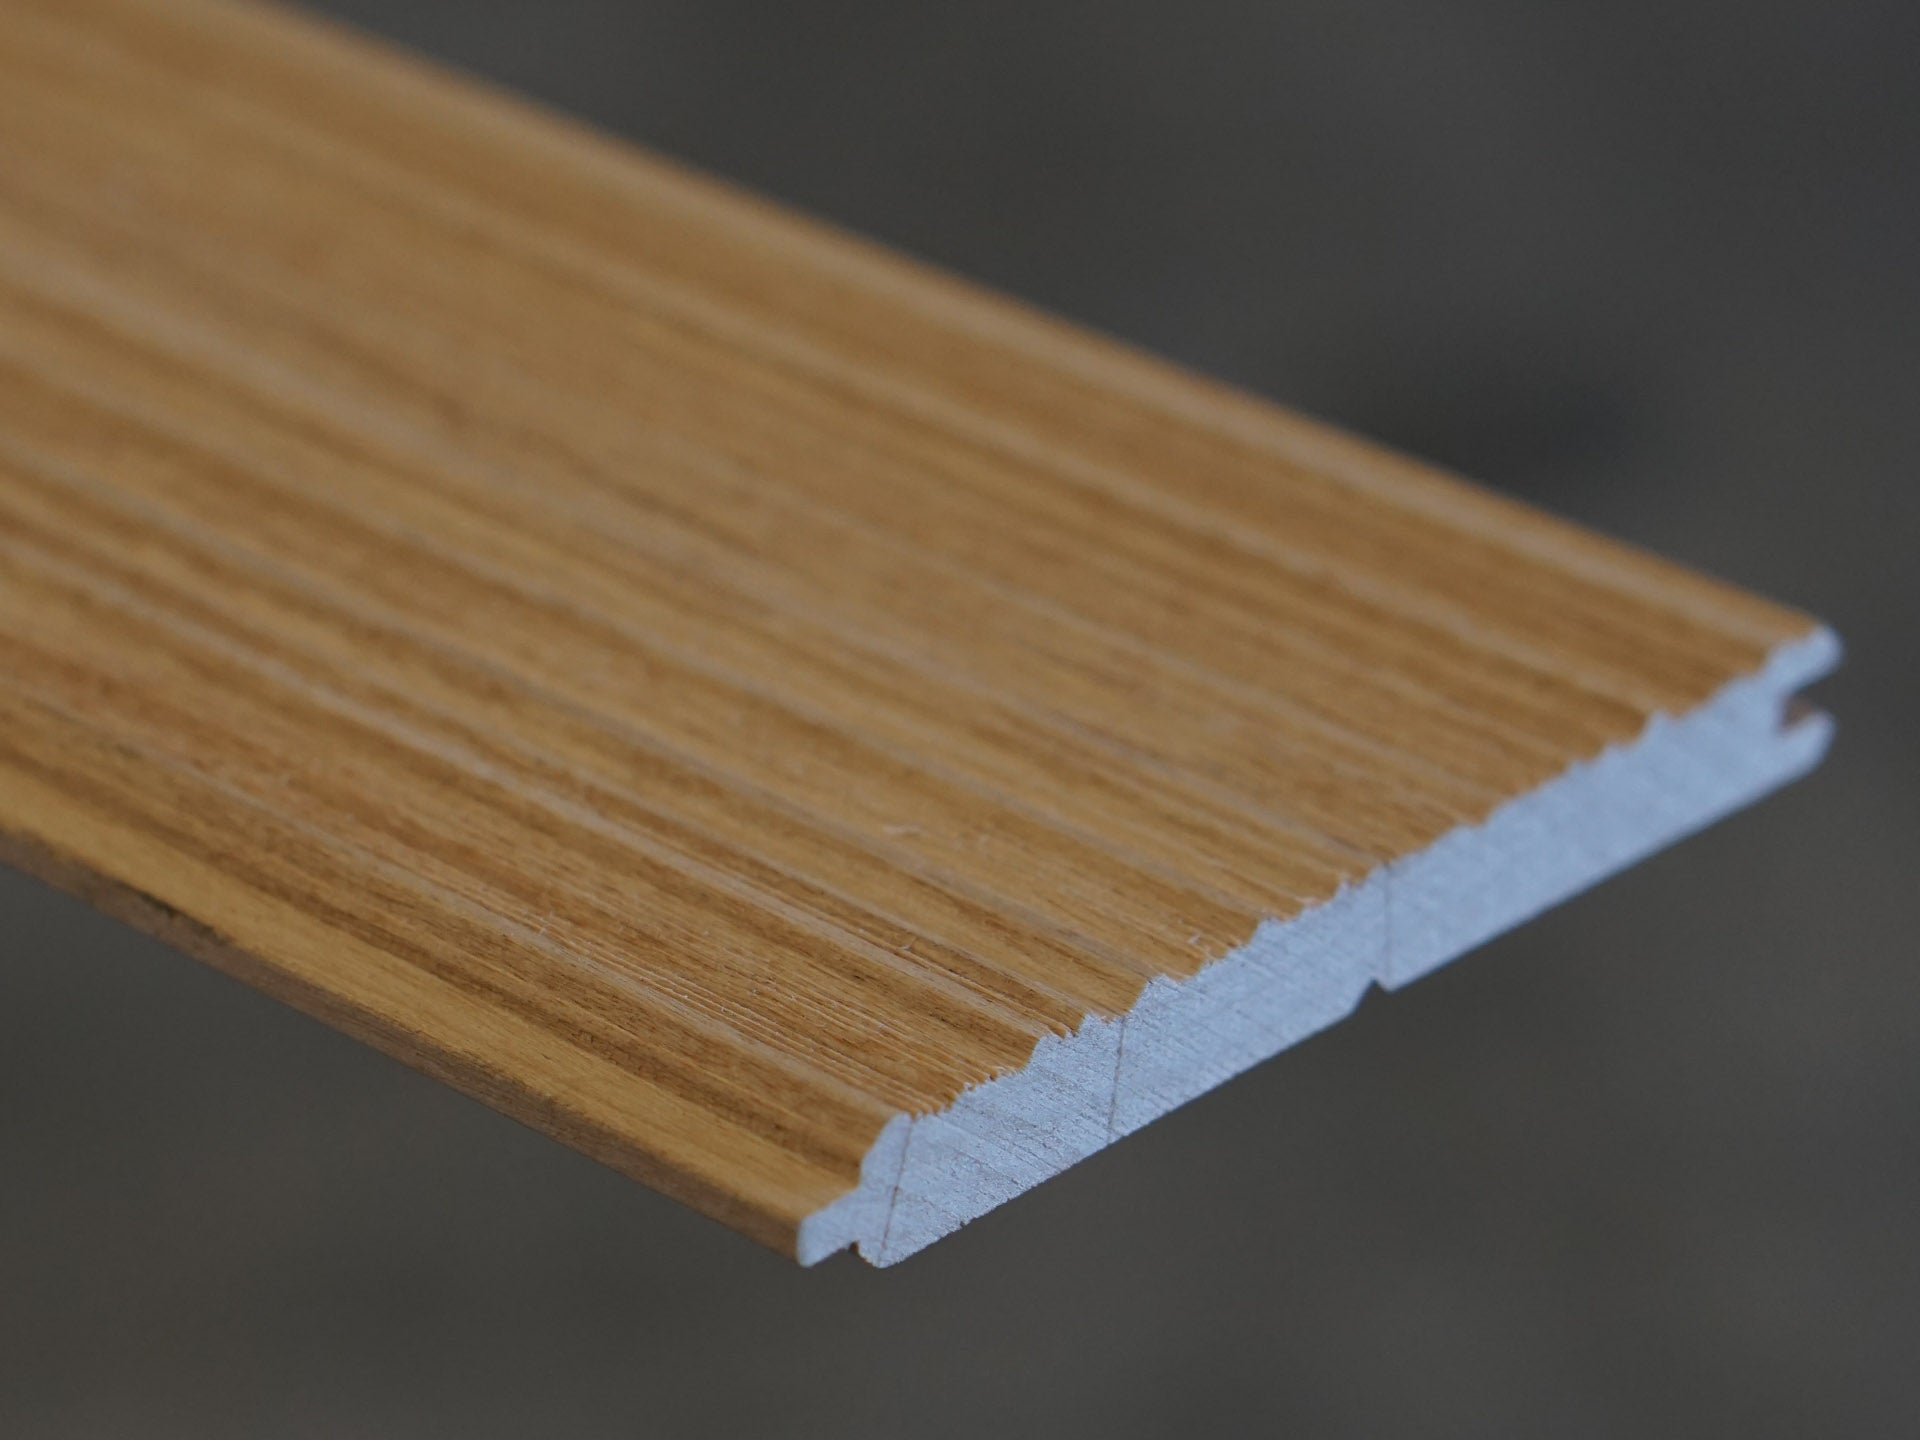 Close up of Weldtex tongue & groove alder hardwood  plank consisting of a combed, striated, brushed wood appearance common in mid-century modern homes and design